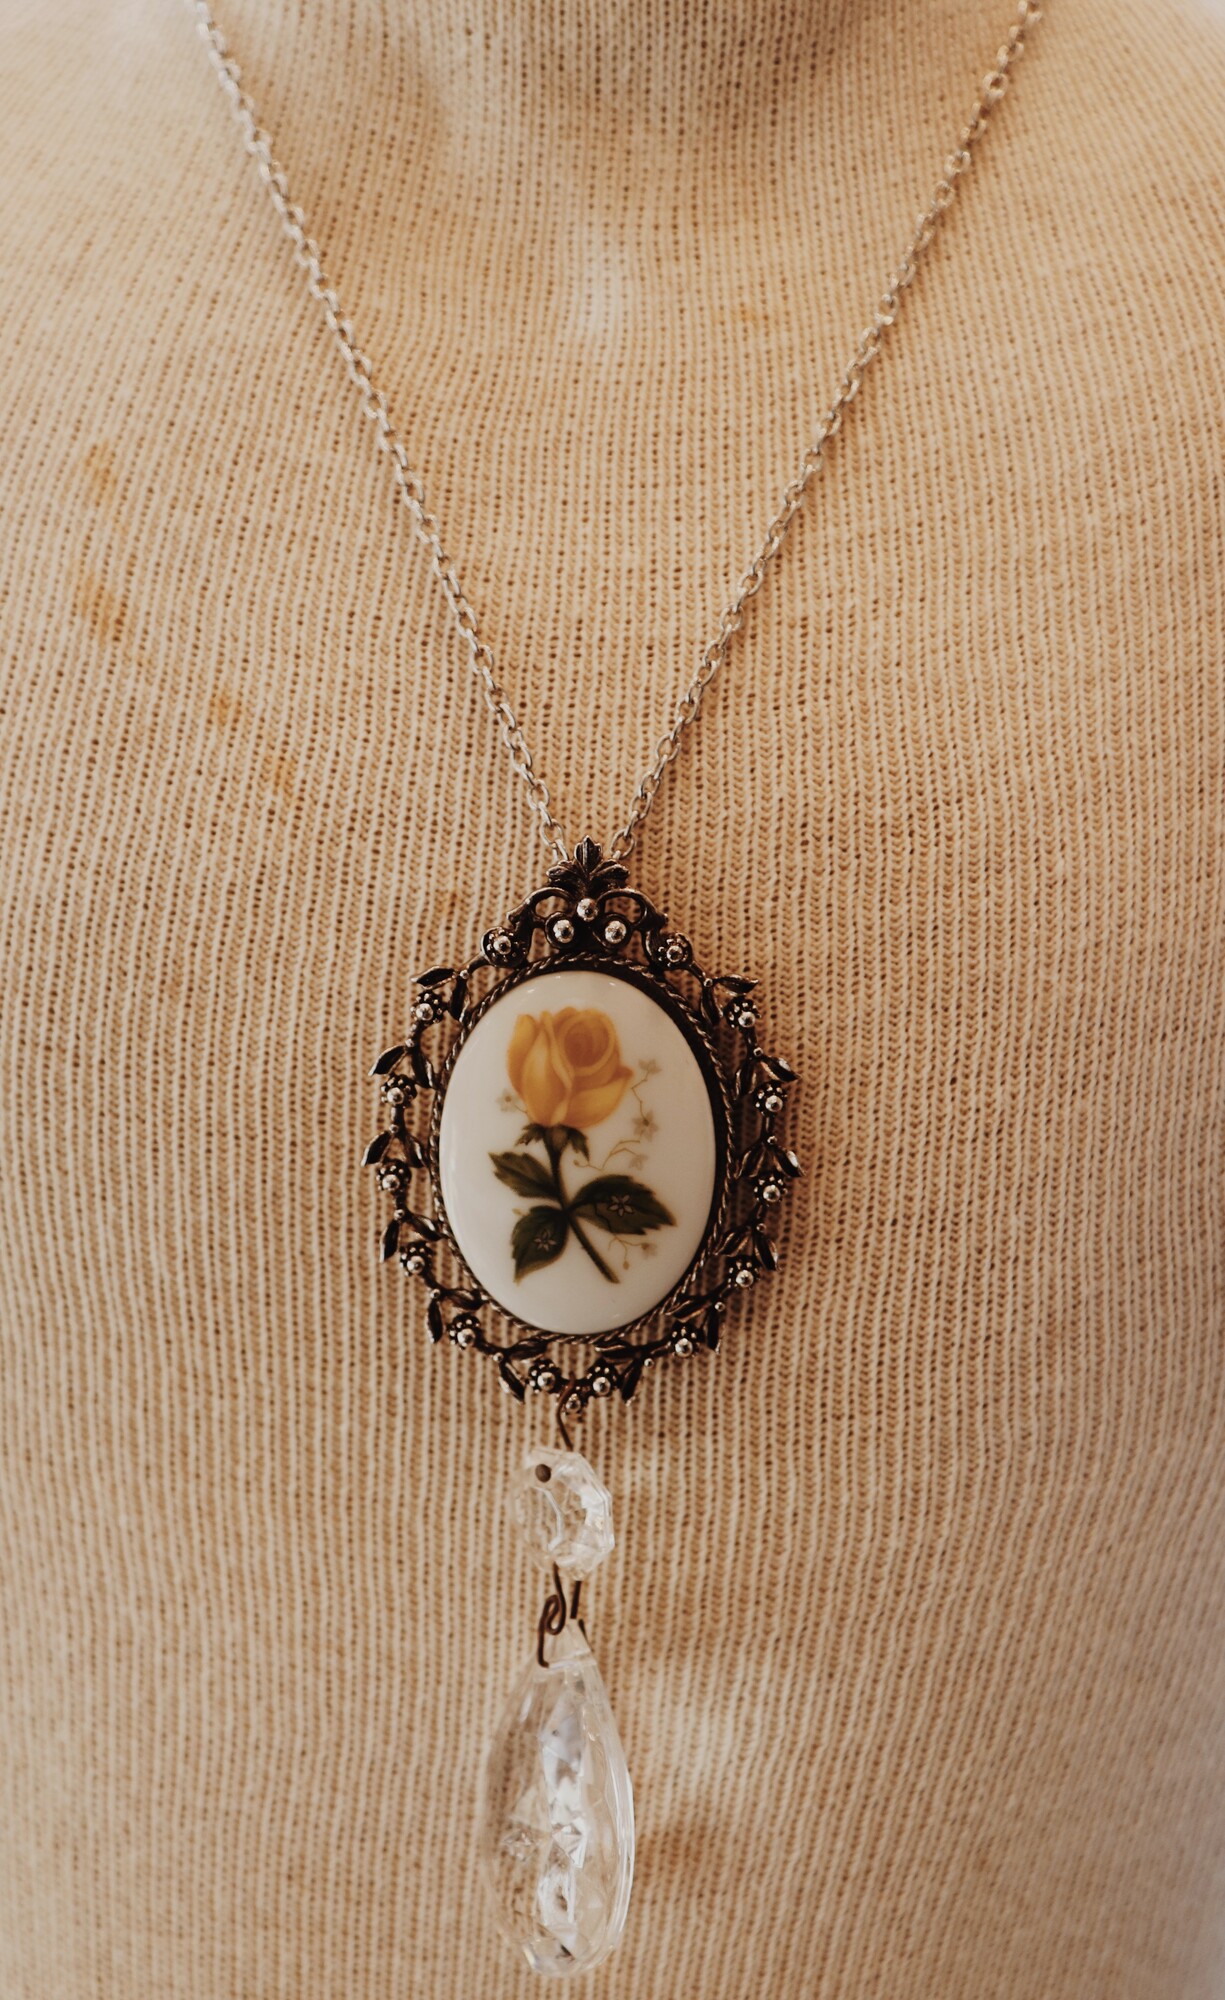 This necklace from Kelli Hawk Designs was handmade from vintage pieces! The vintage pendant measures 4.5 inches long, and the necklace is on a 19 inch chain.